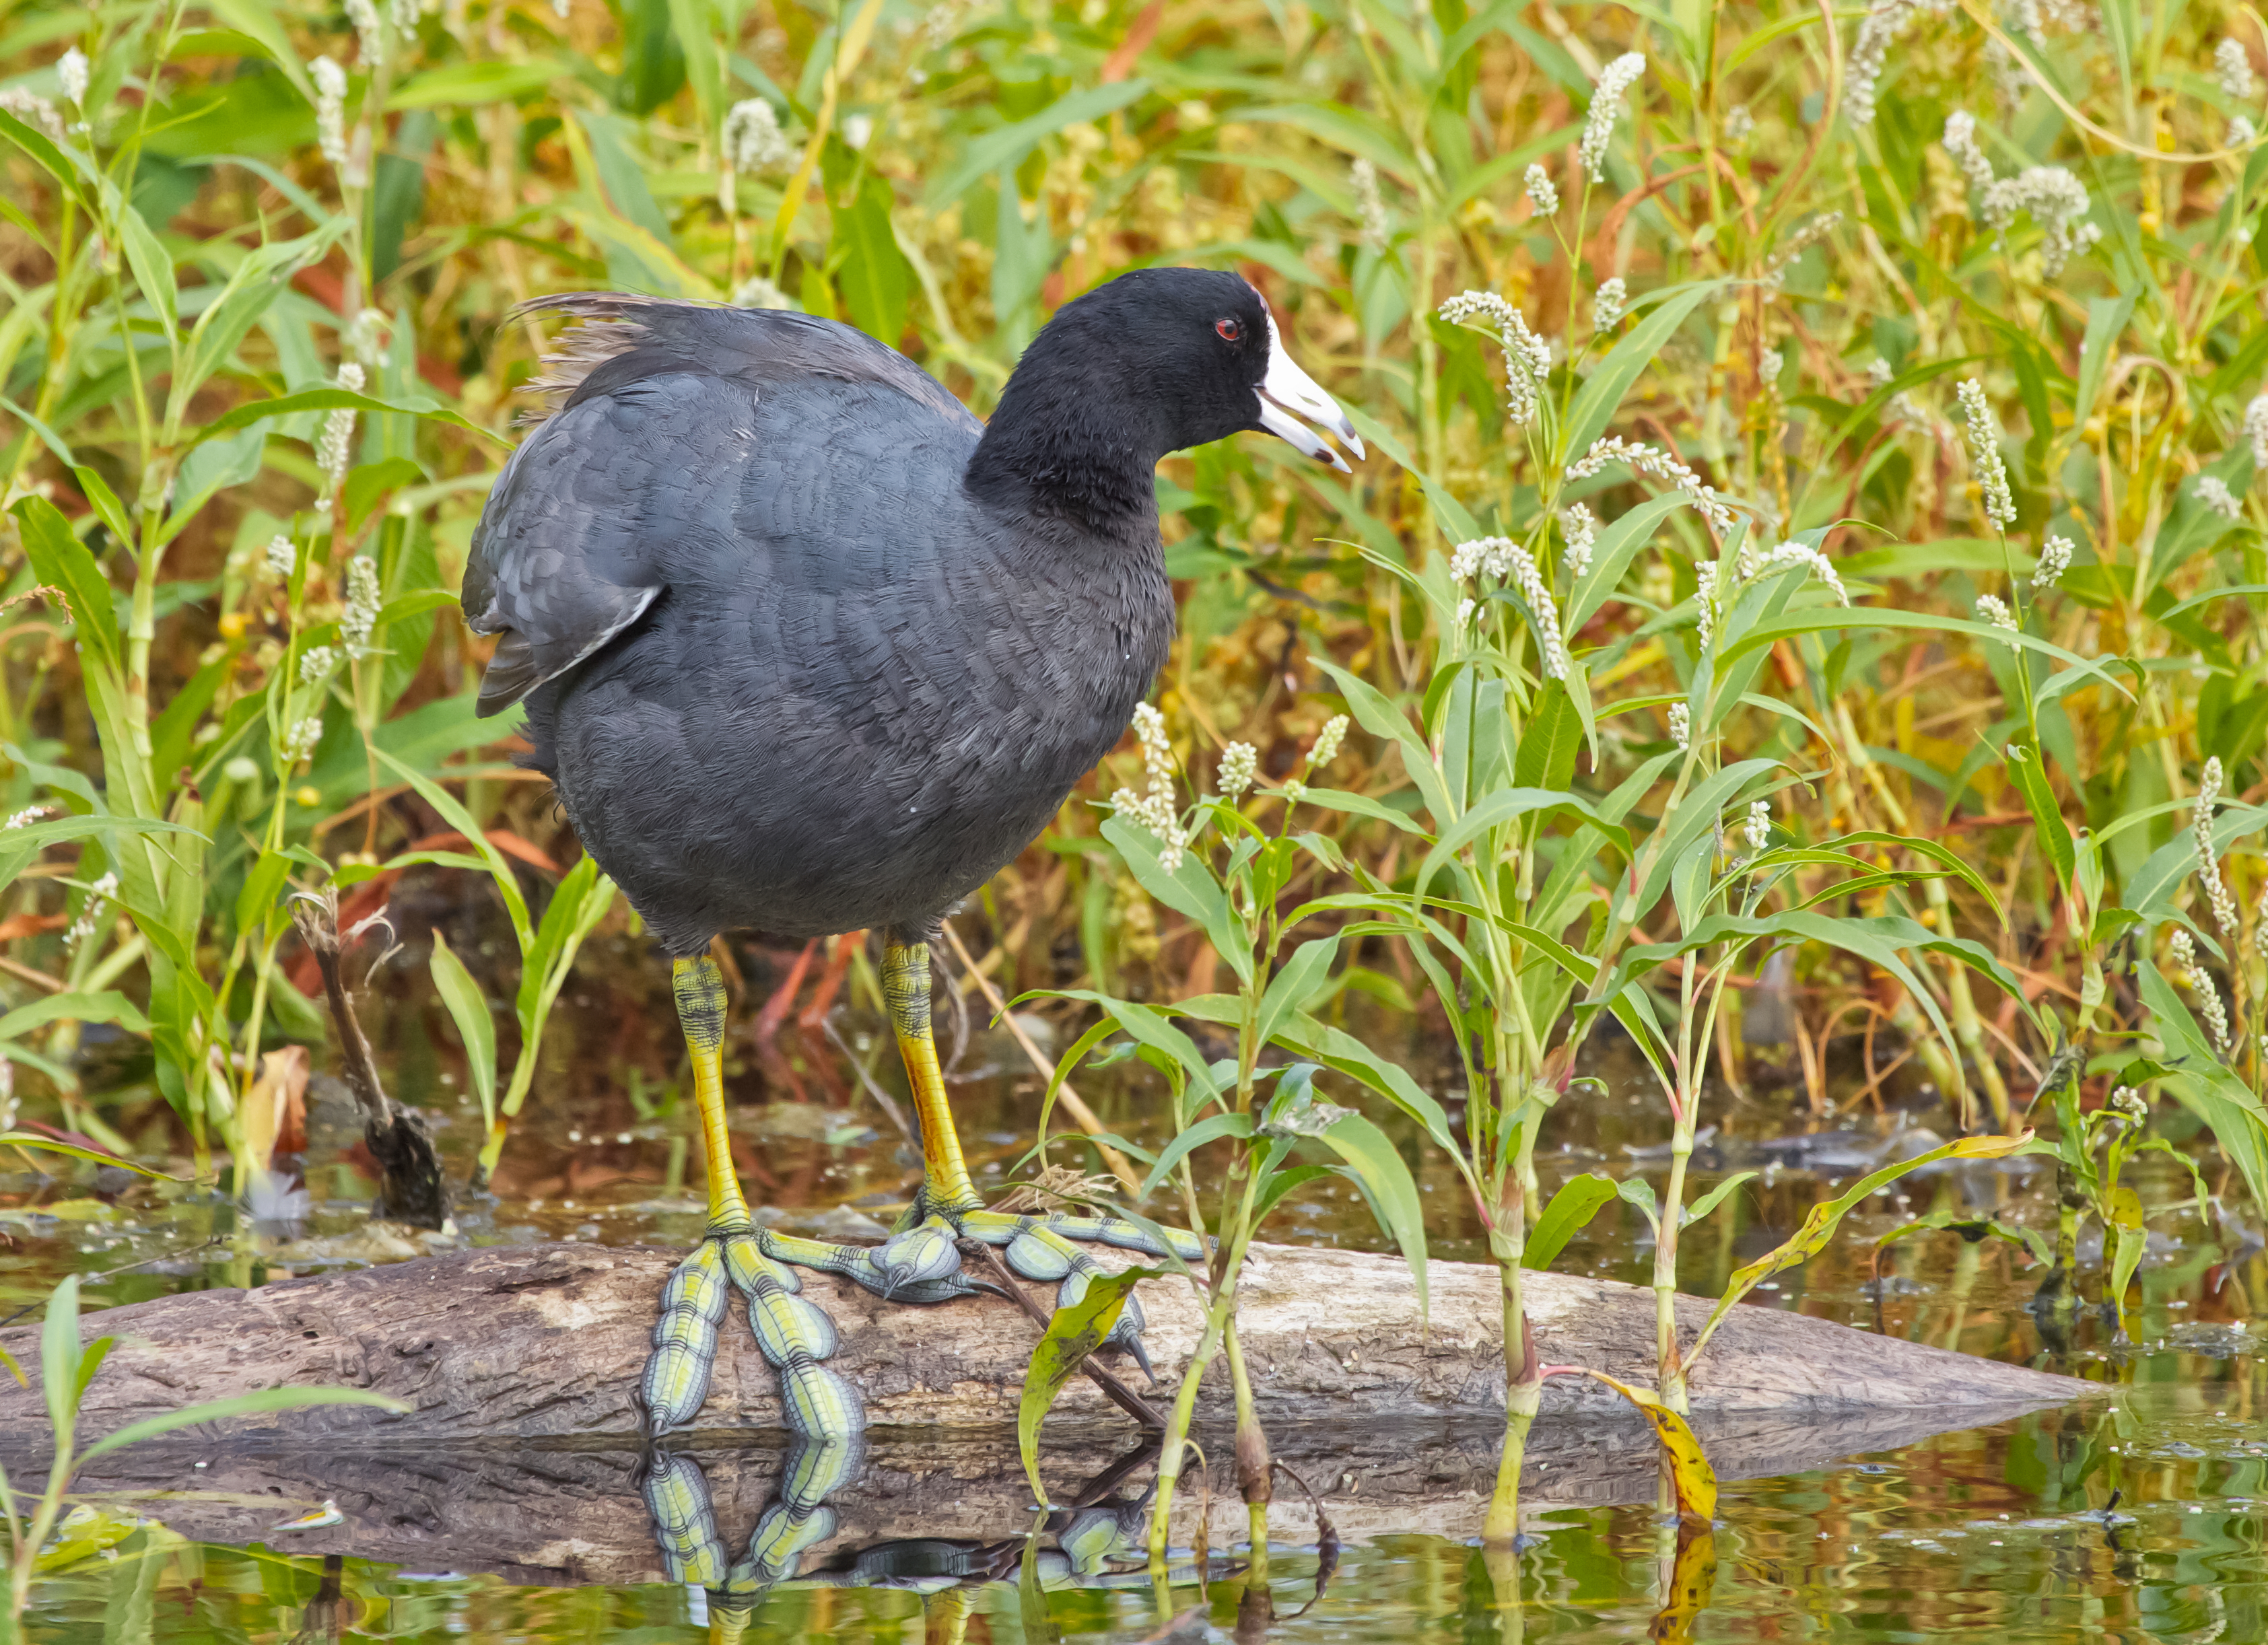 Black bird with yellow legs sitting by waters edge. 